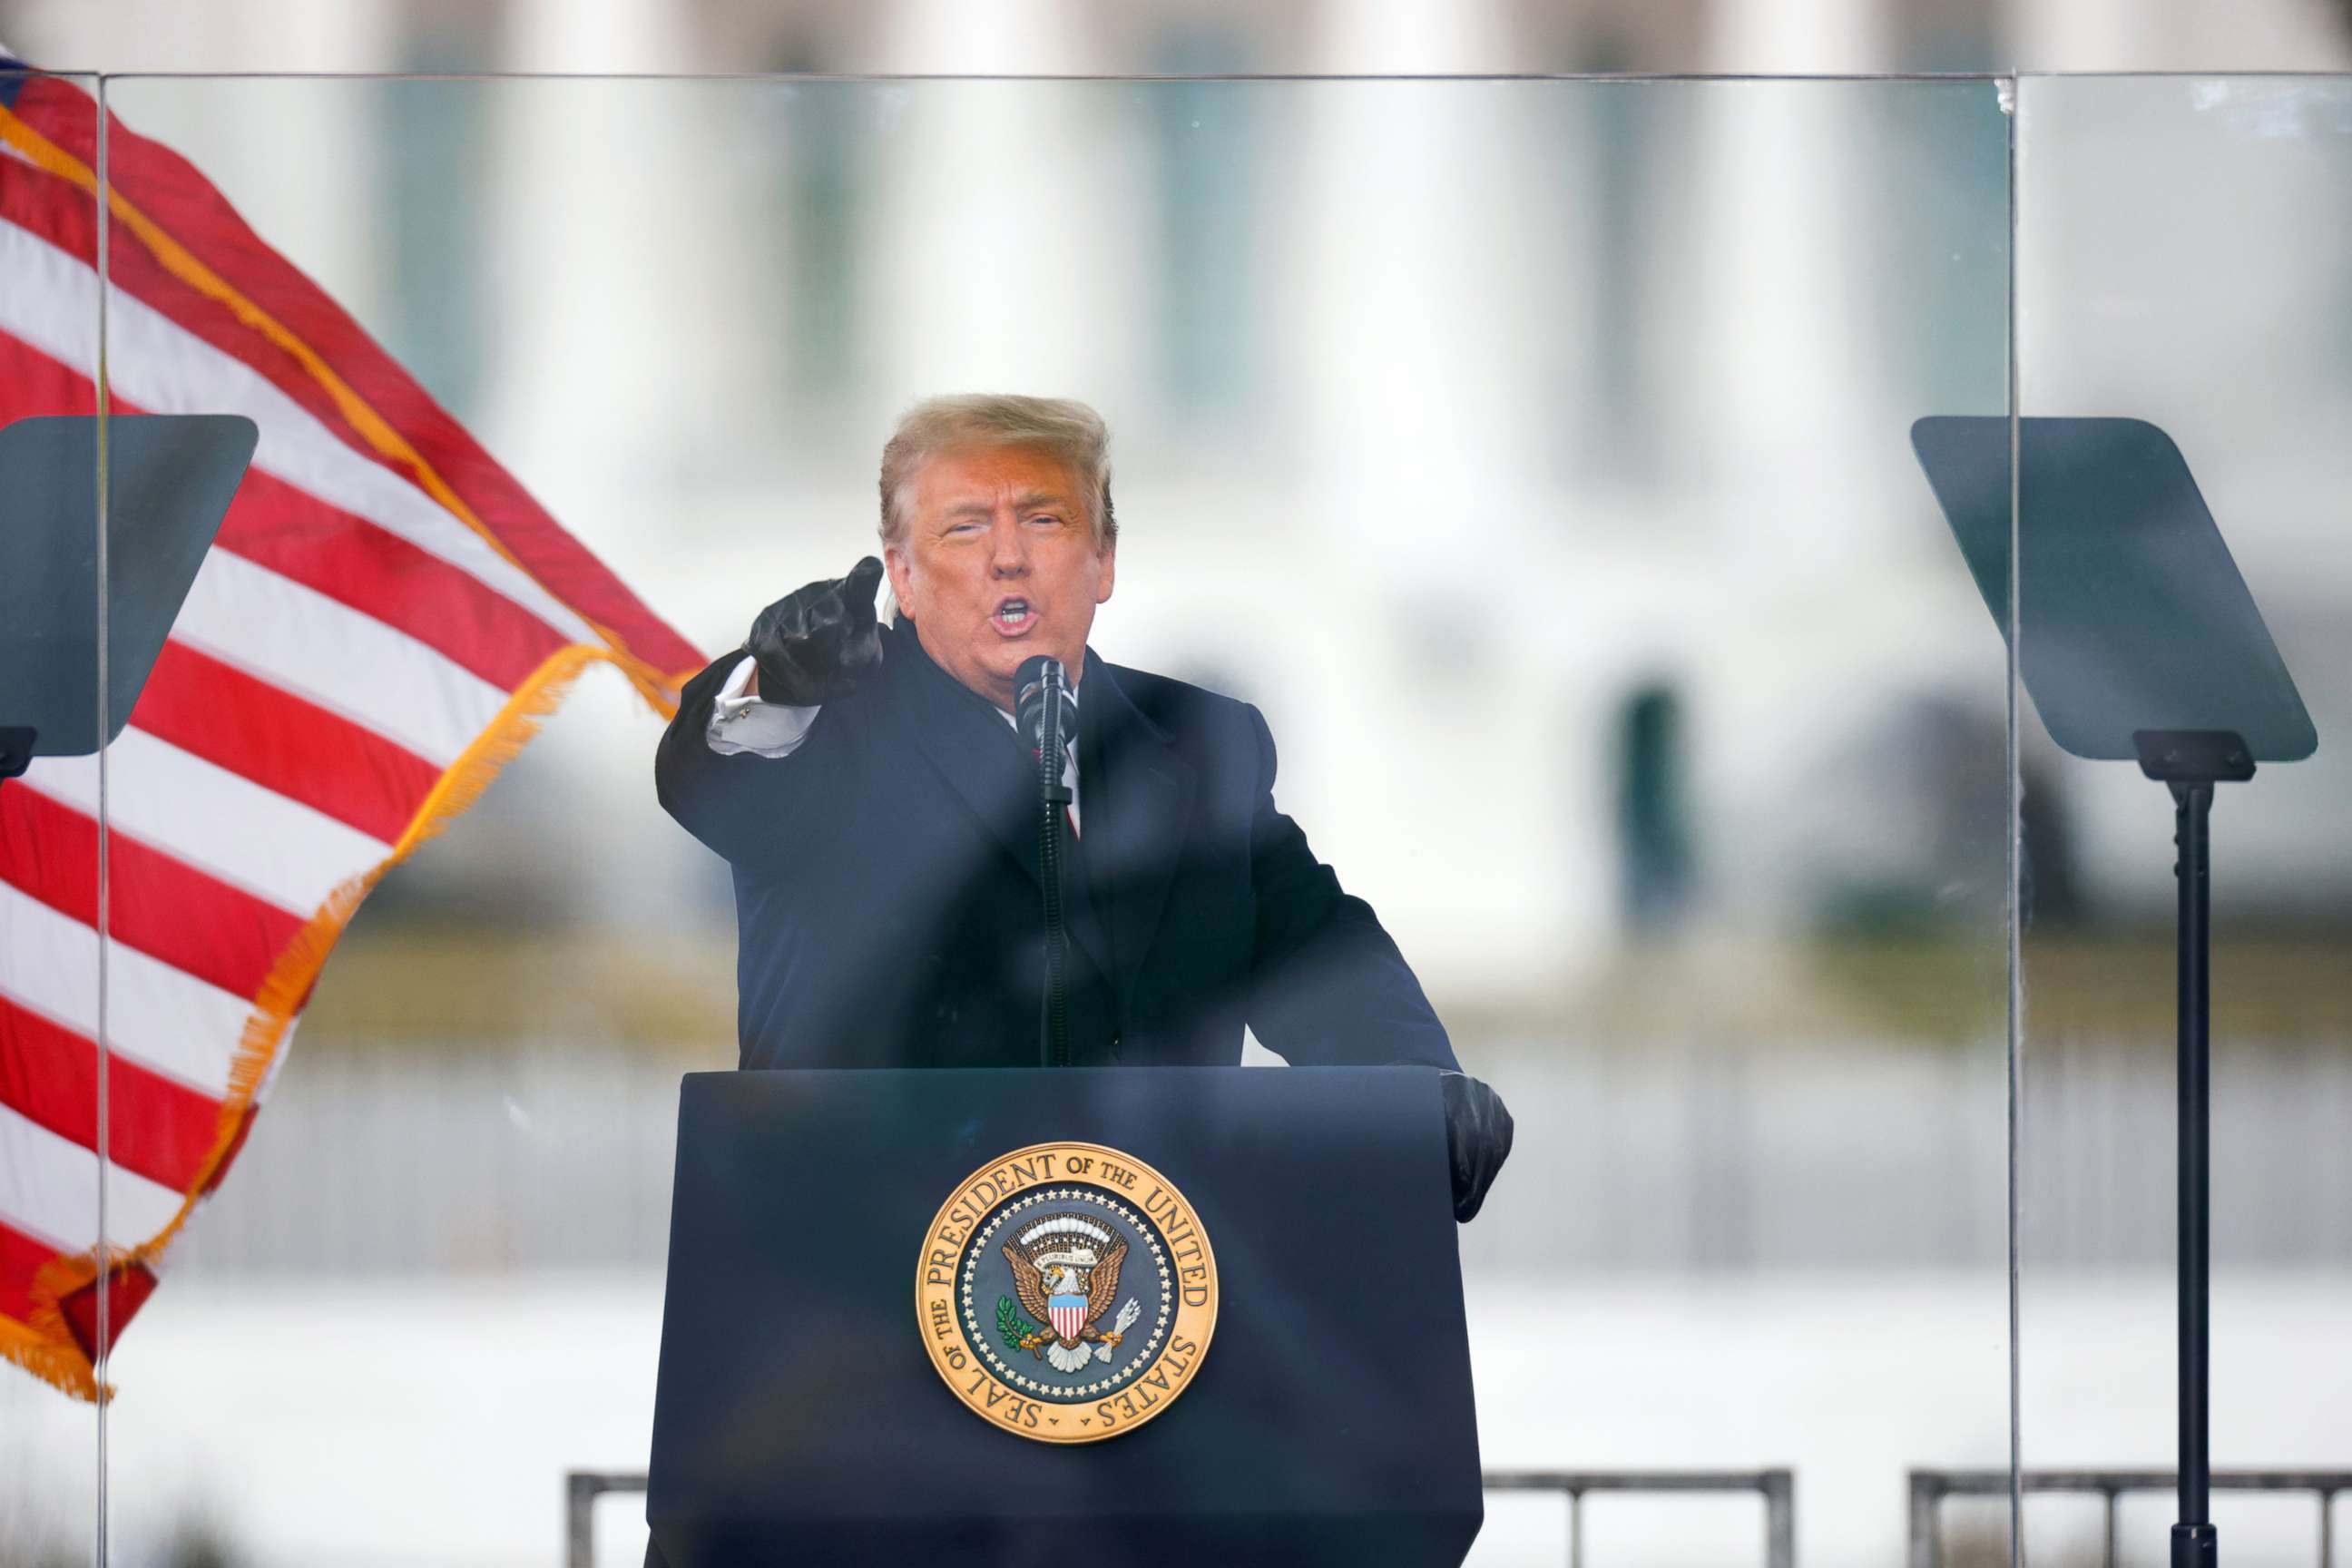 PHOTO: President Donald Trump gestures as he speaks during a rally to contest the certification of the 2020 presidential election results, in Washington, D.C., Jan. 6, 2021.